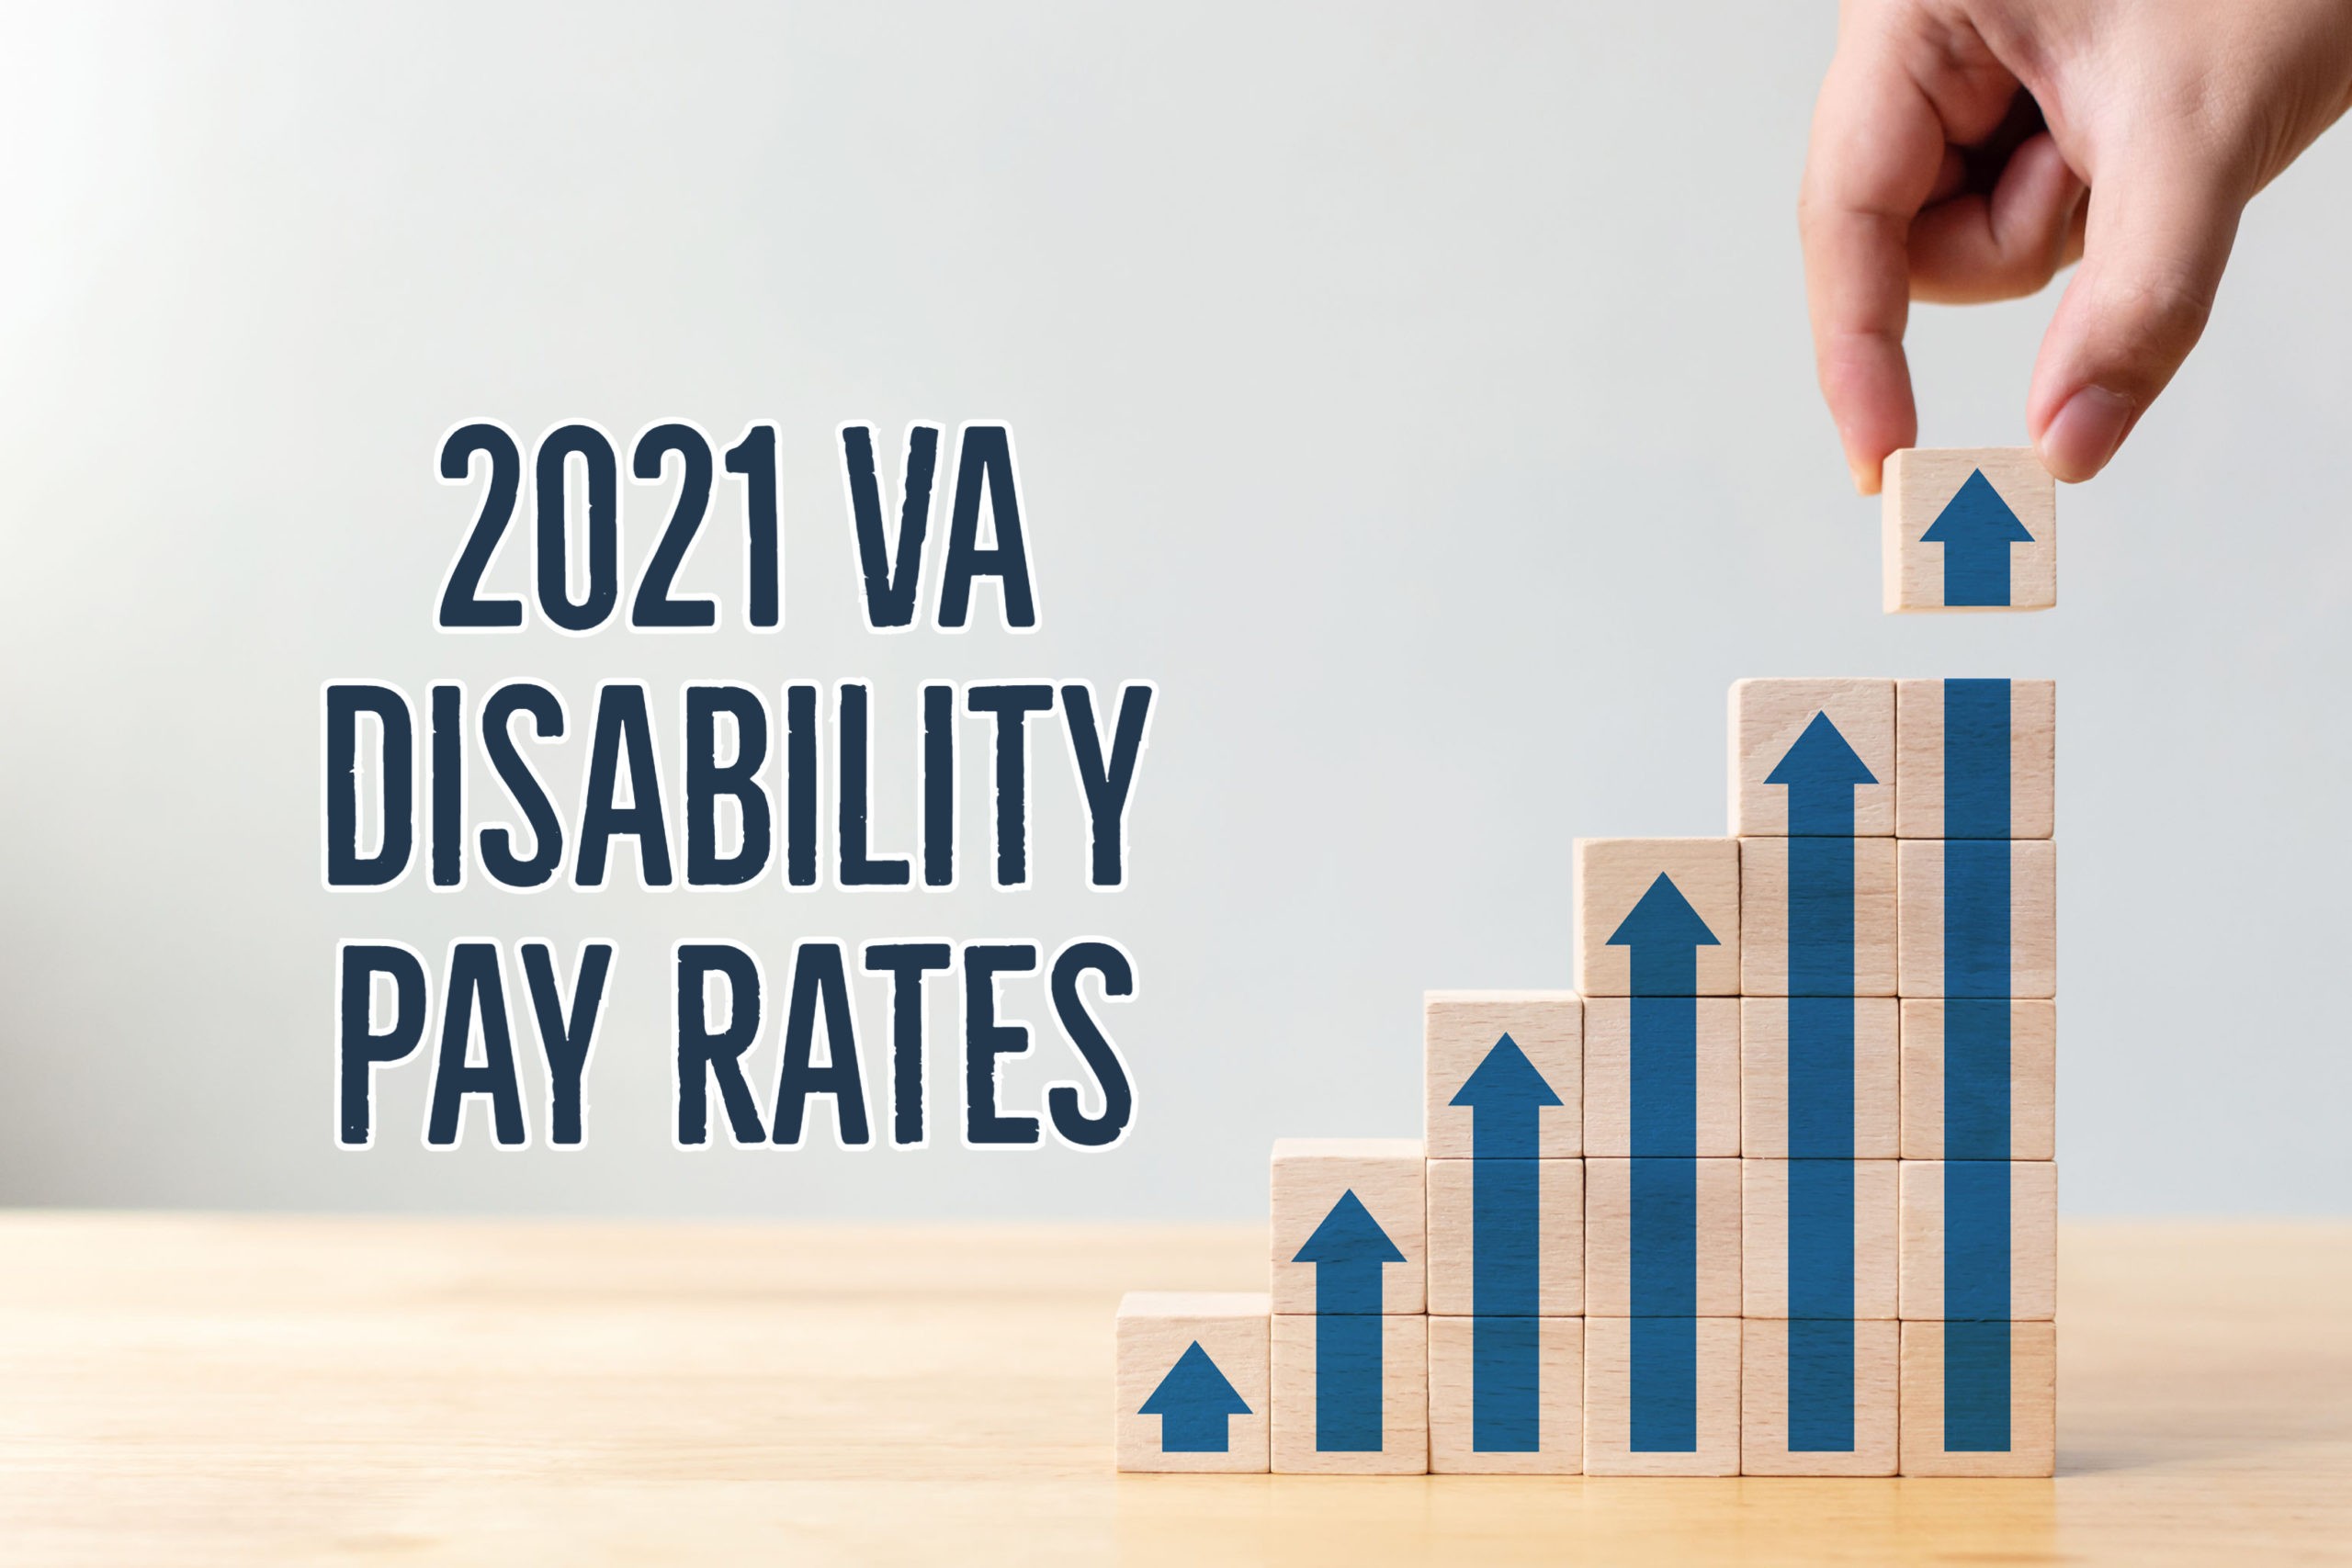 VA Disability Rates for 2021 With Cost of Living Adjustment CCK Law